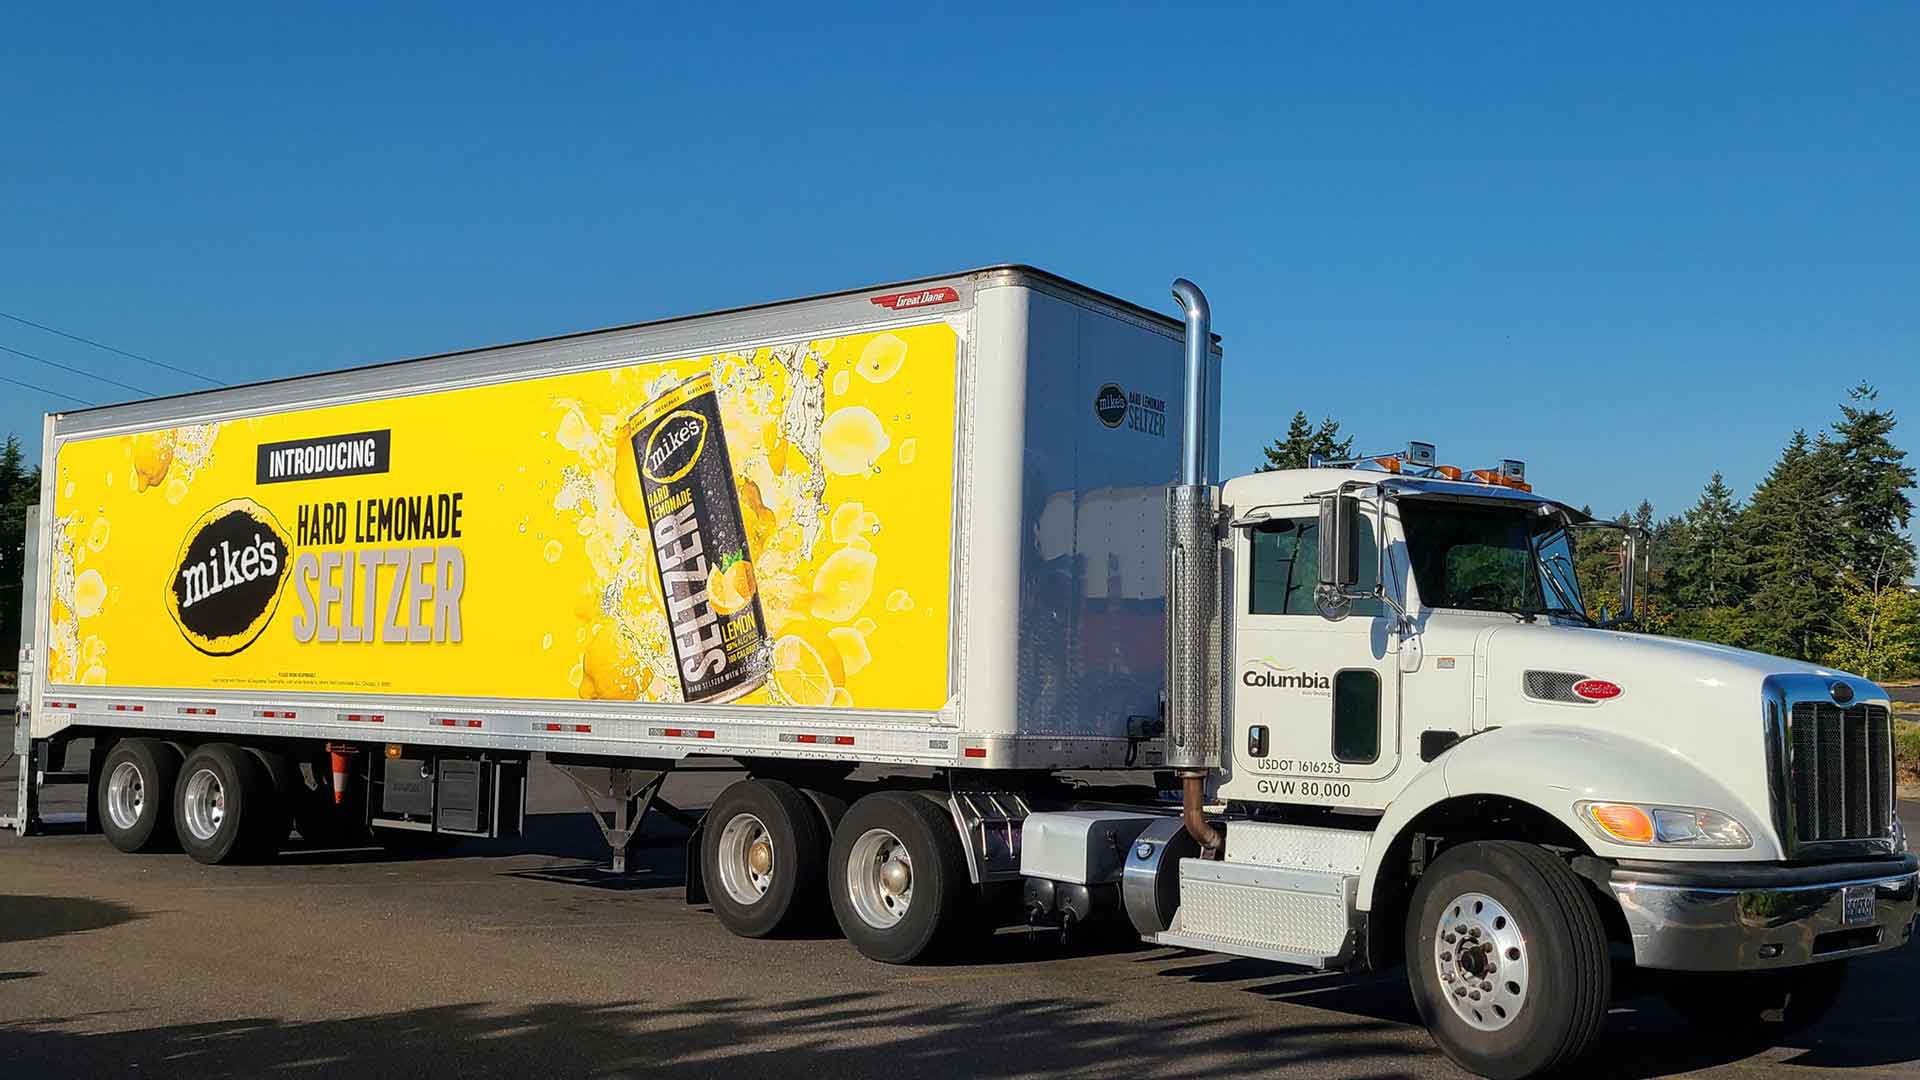 Columbia Distributing outfitted 18 wheelers with innovative ads